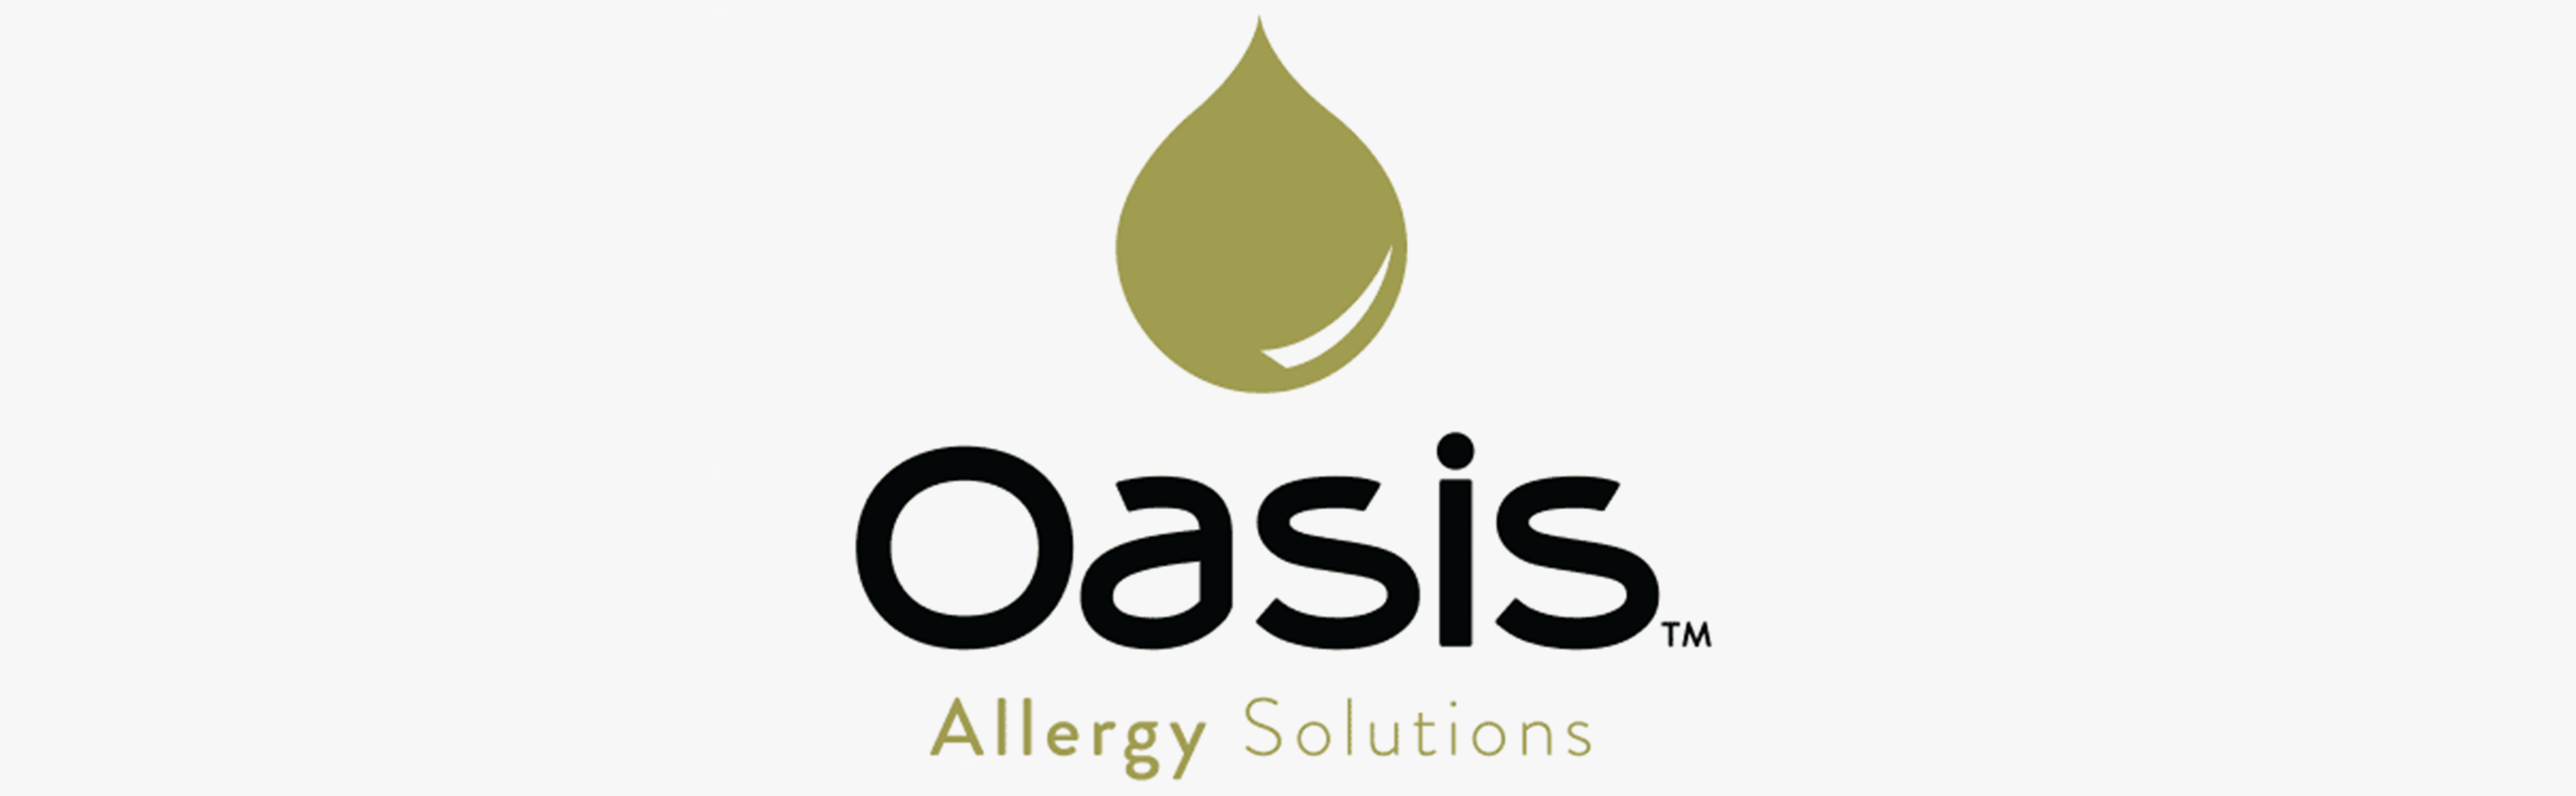 Oasis Allergy Solutions